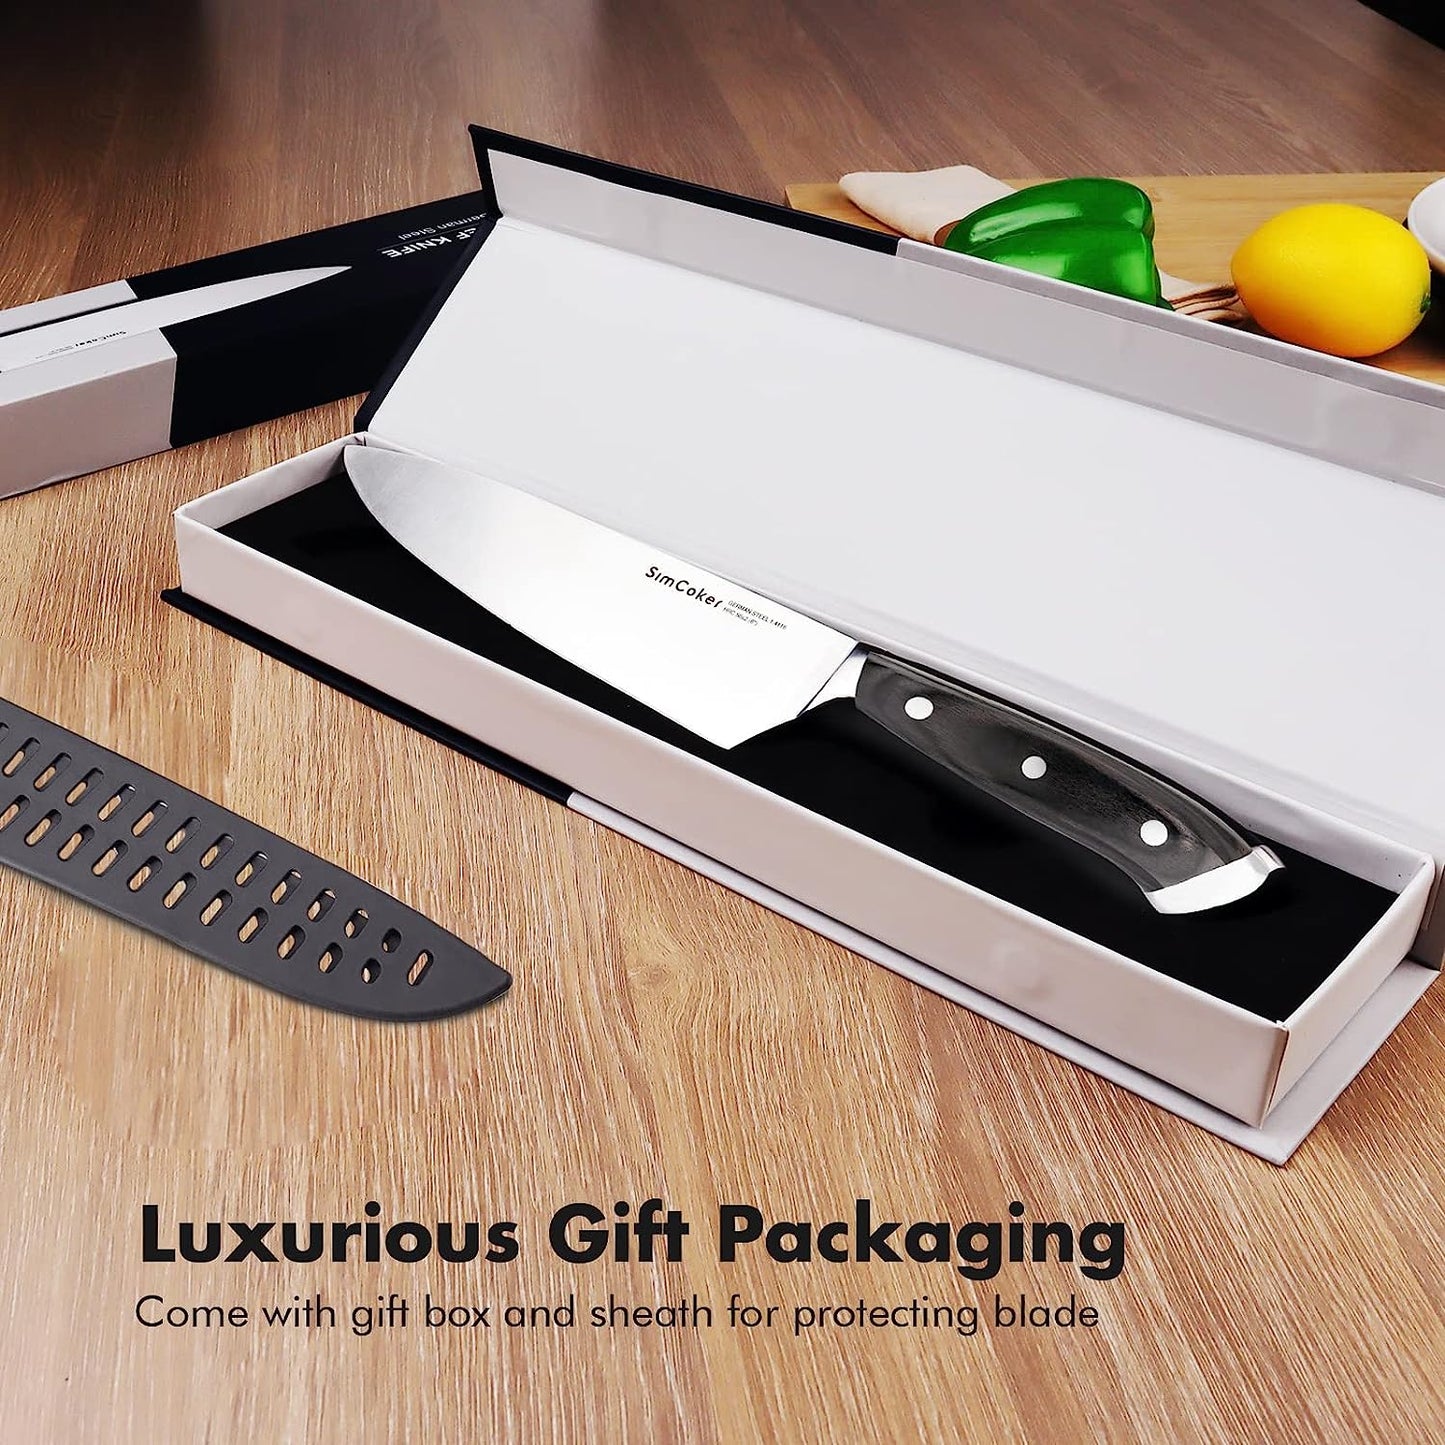 Chef Knife,8 Inch Knife,Sharp Kitchen Knife,German High Carbon Stainless Steel EN1.4116, Ergonomic Pakkawood Handle and Gift Box